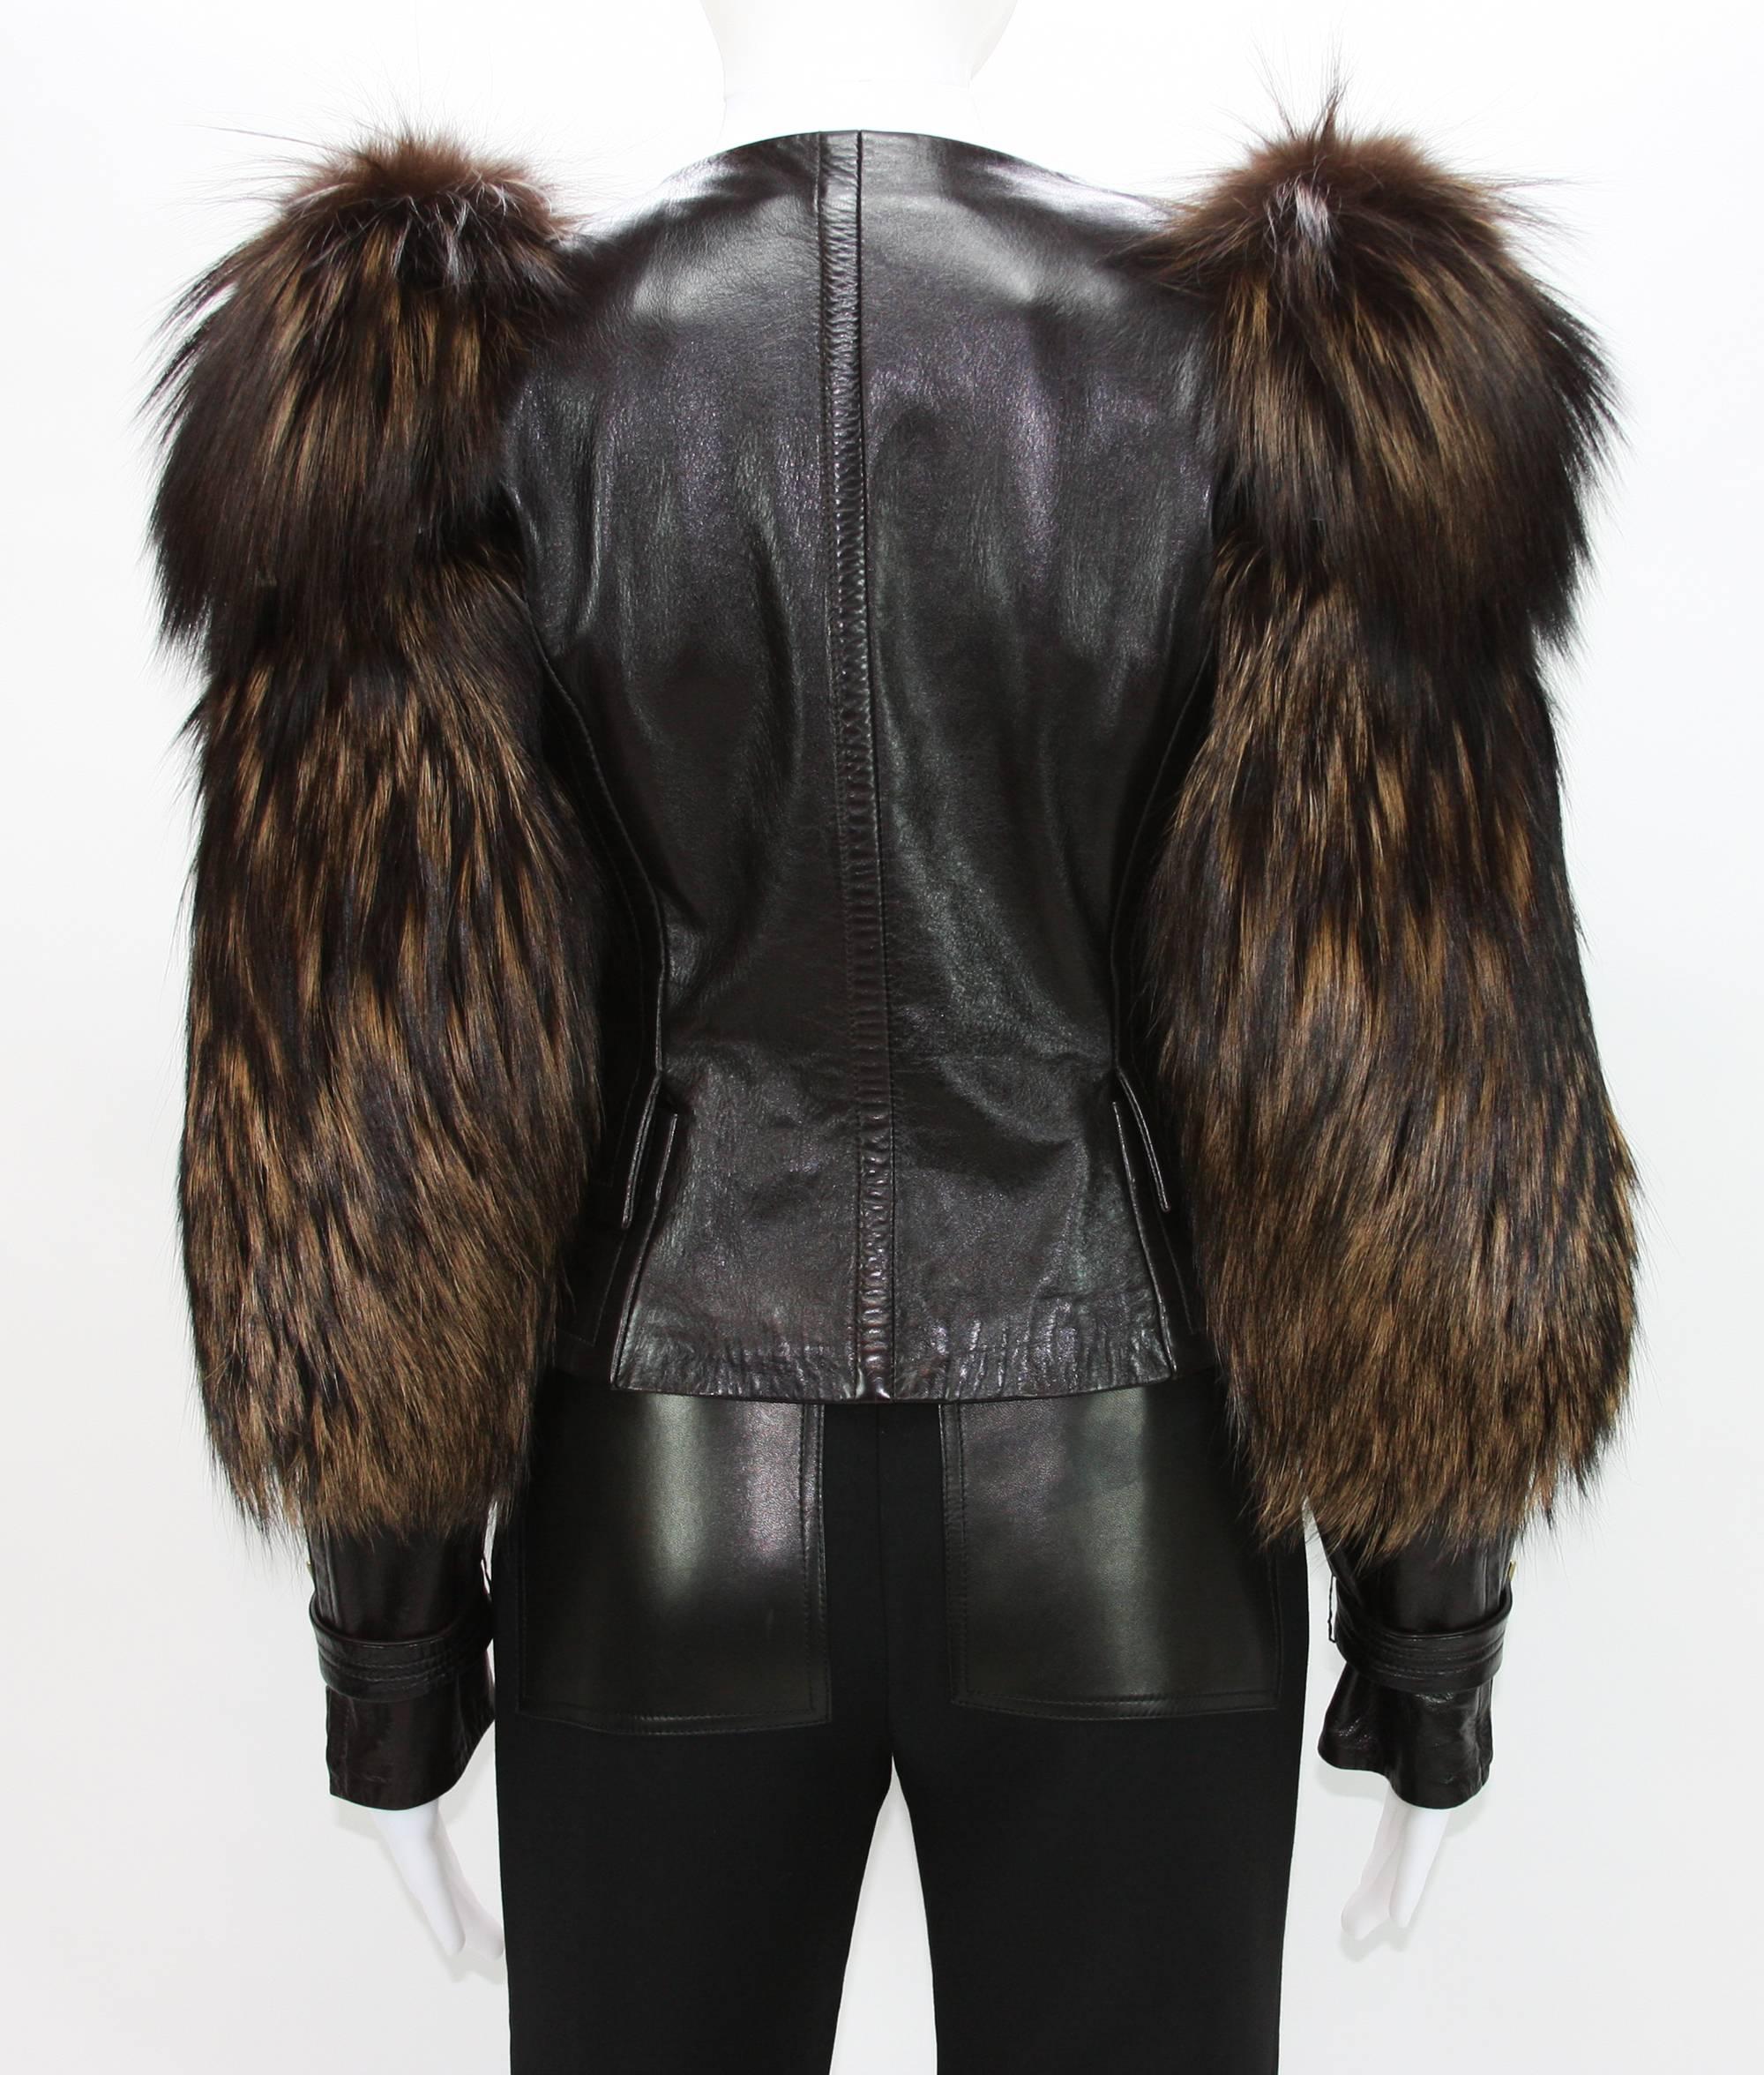 Tom Ford for Gucci Fall 2003 Fox Fur Leather Brown Jacket 38 3